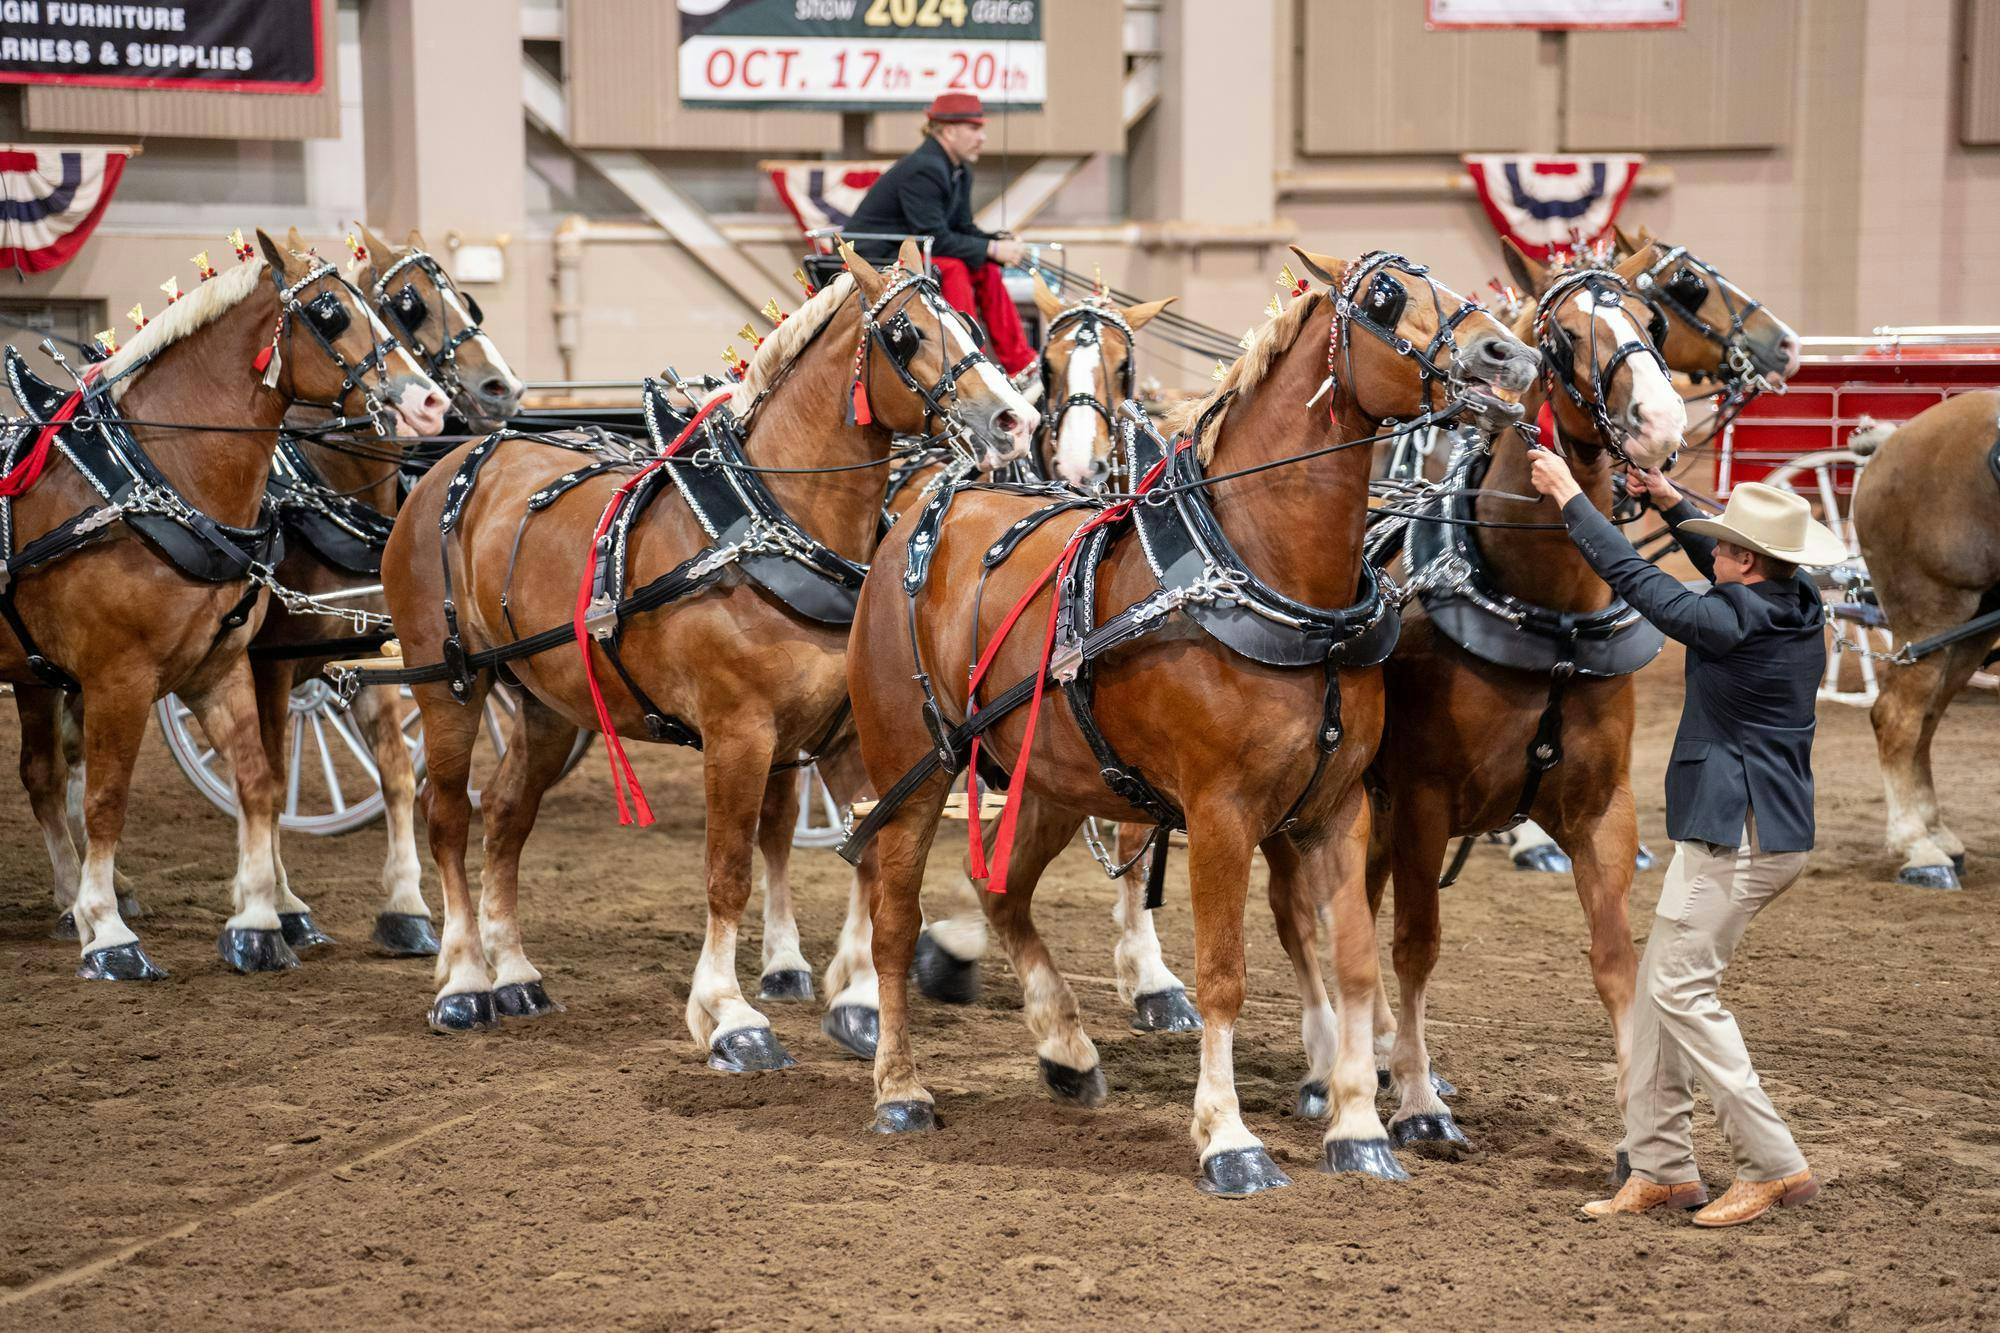 <p>Hold your horses- This team of six draft horses competed in the Classic All Breed Six Horse Hitch competition which was the finale for the show. Michigan Great Lakes International Draft Horse Show and Pull ran from October 12-15 at the Michigan State University Pavilion for Agriculture and Livestock Education. </p>